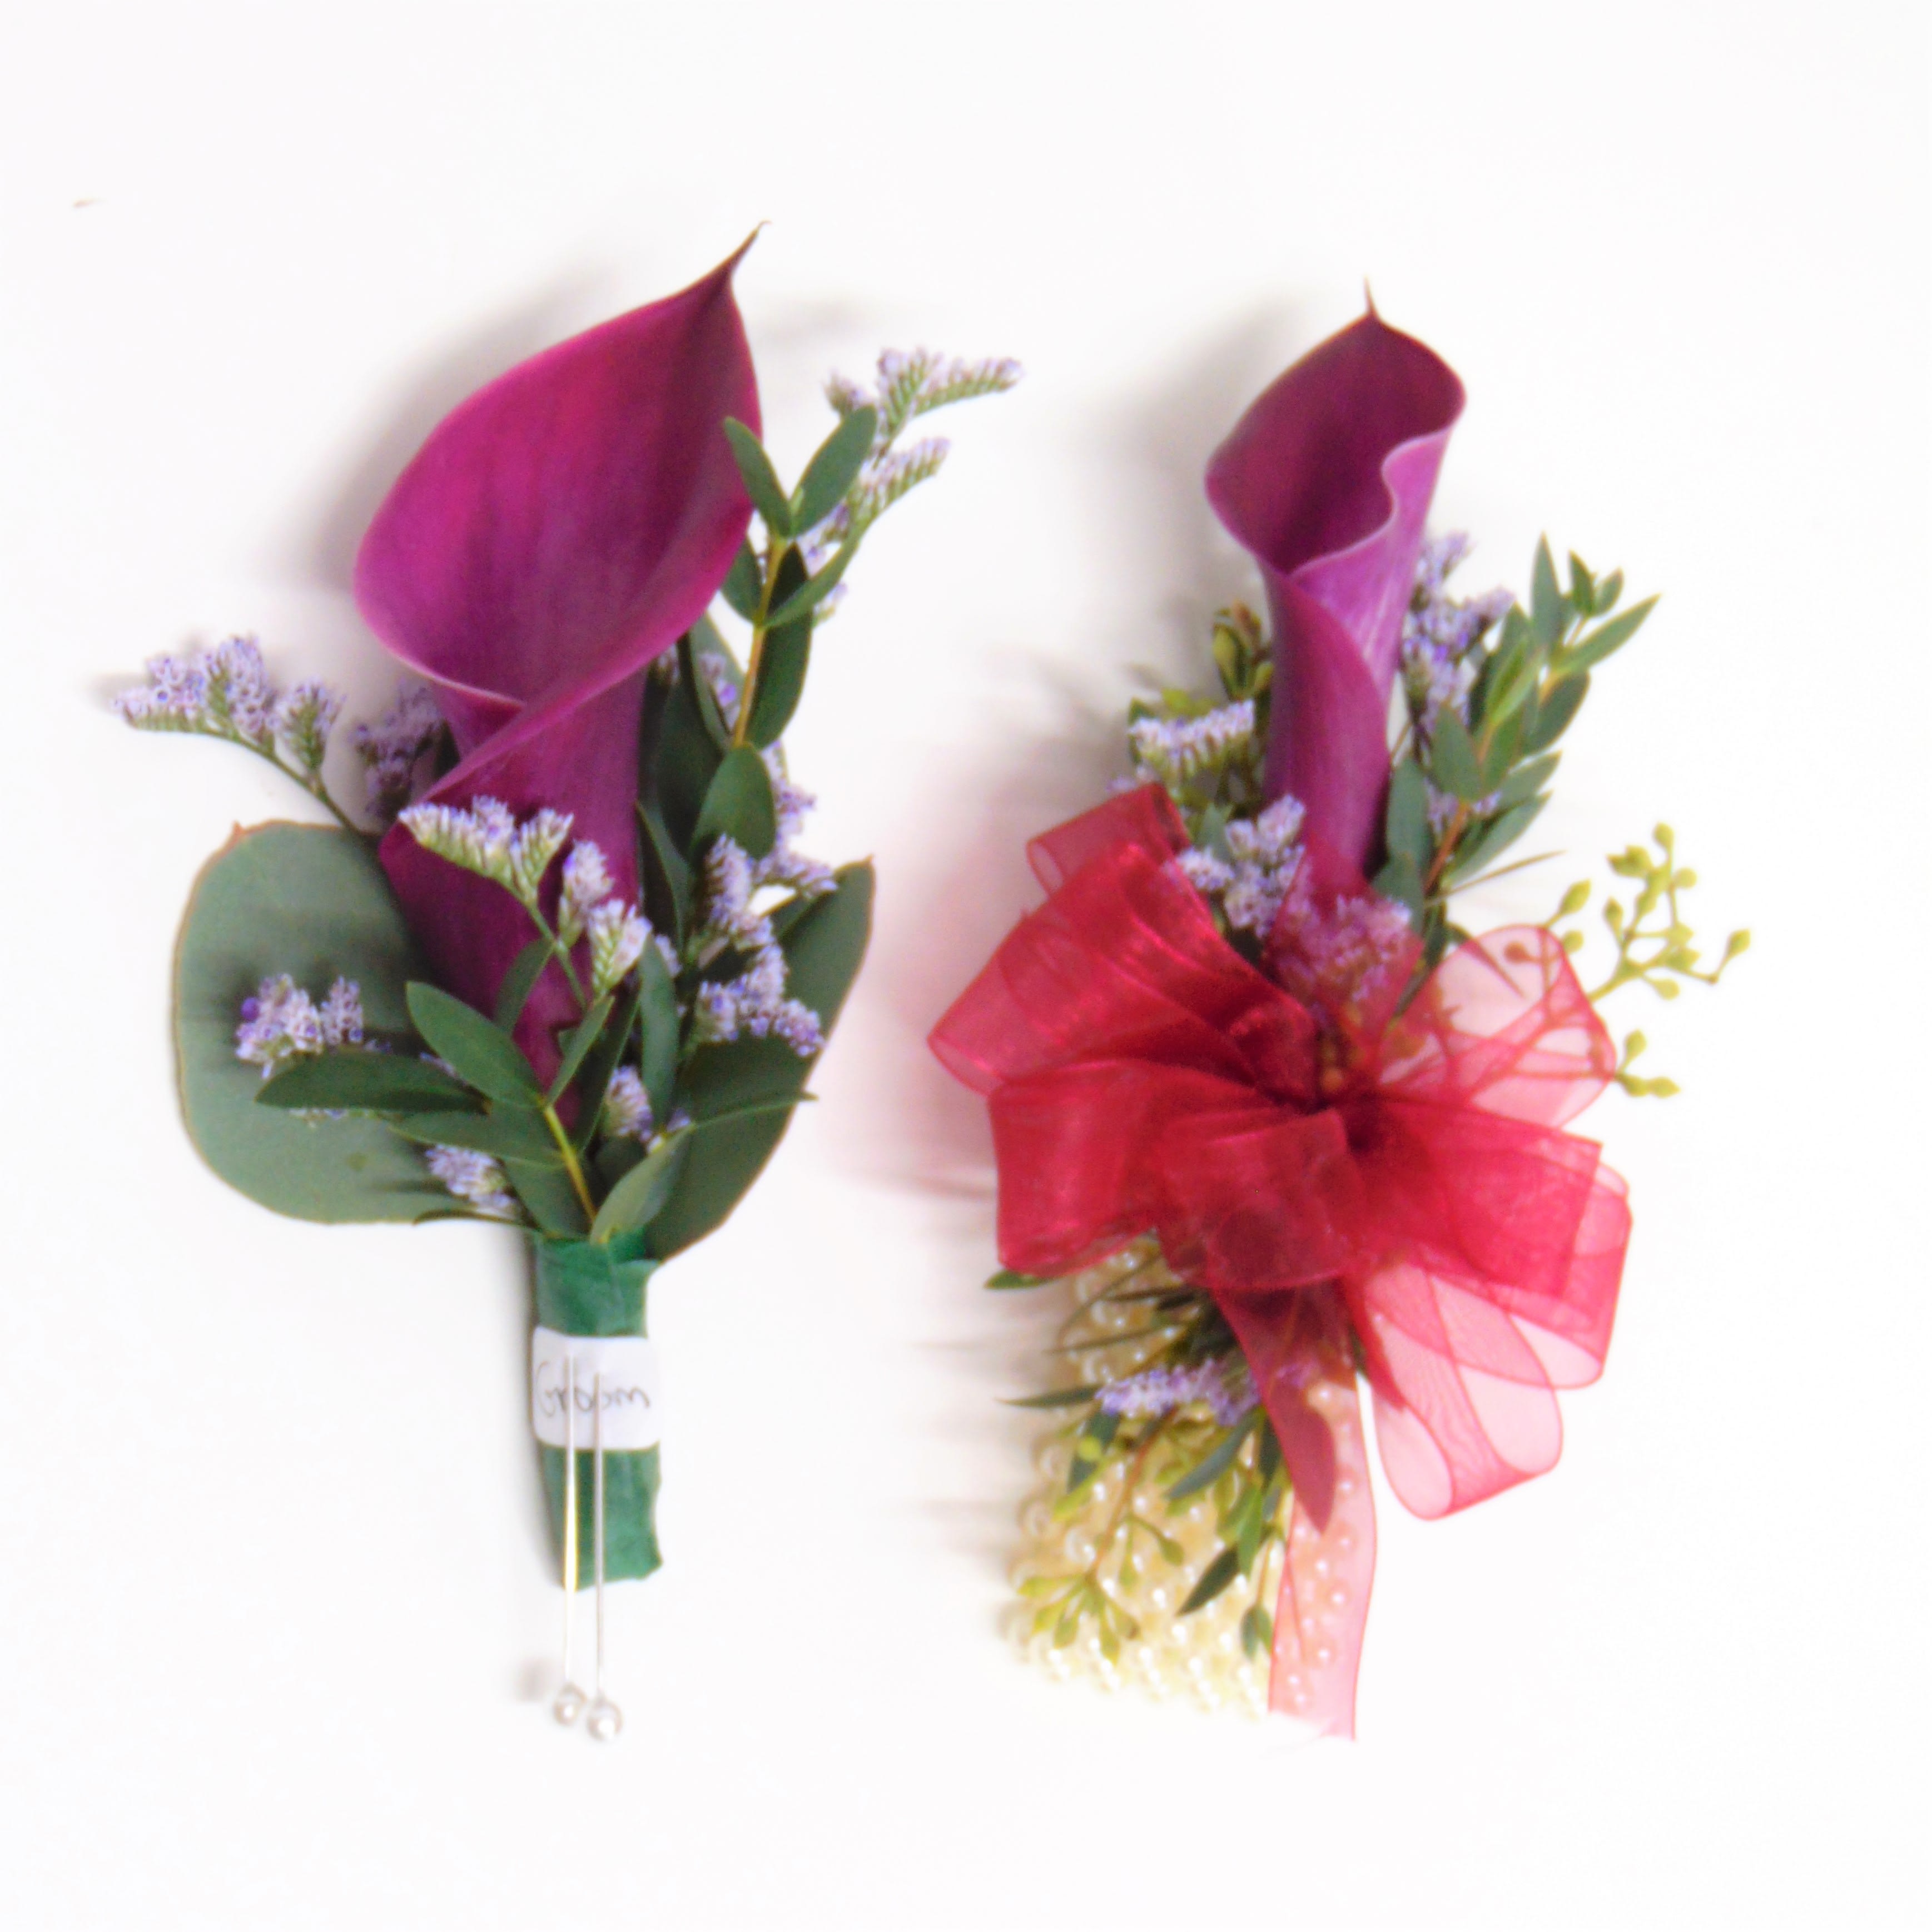 Burgundy Calla Lily Pair - Burgundy Calla Lily Boutonniere and matching burgundy Calla Lily Wrist Corsage and eucalyptus and limonium accents. Corsage is on a standard wristlet. Standard option is pictured. The deluxe option adds bling. Includes boxes.